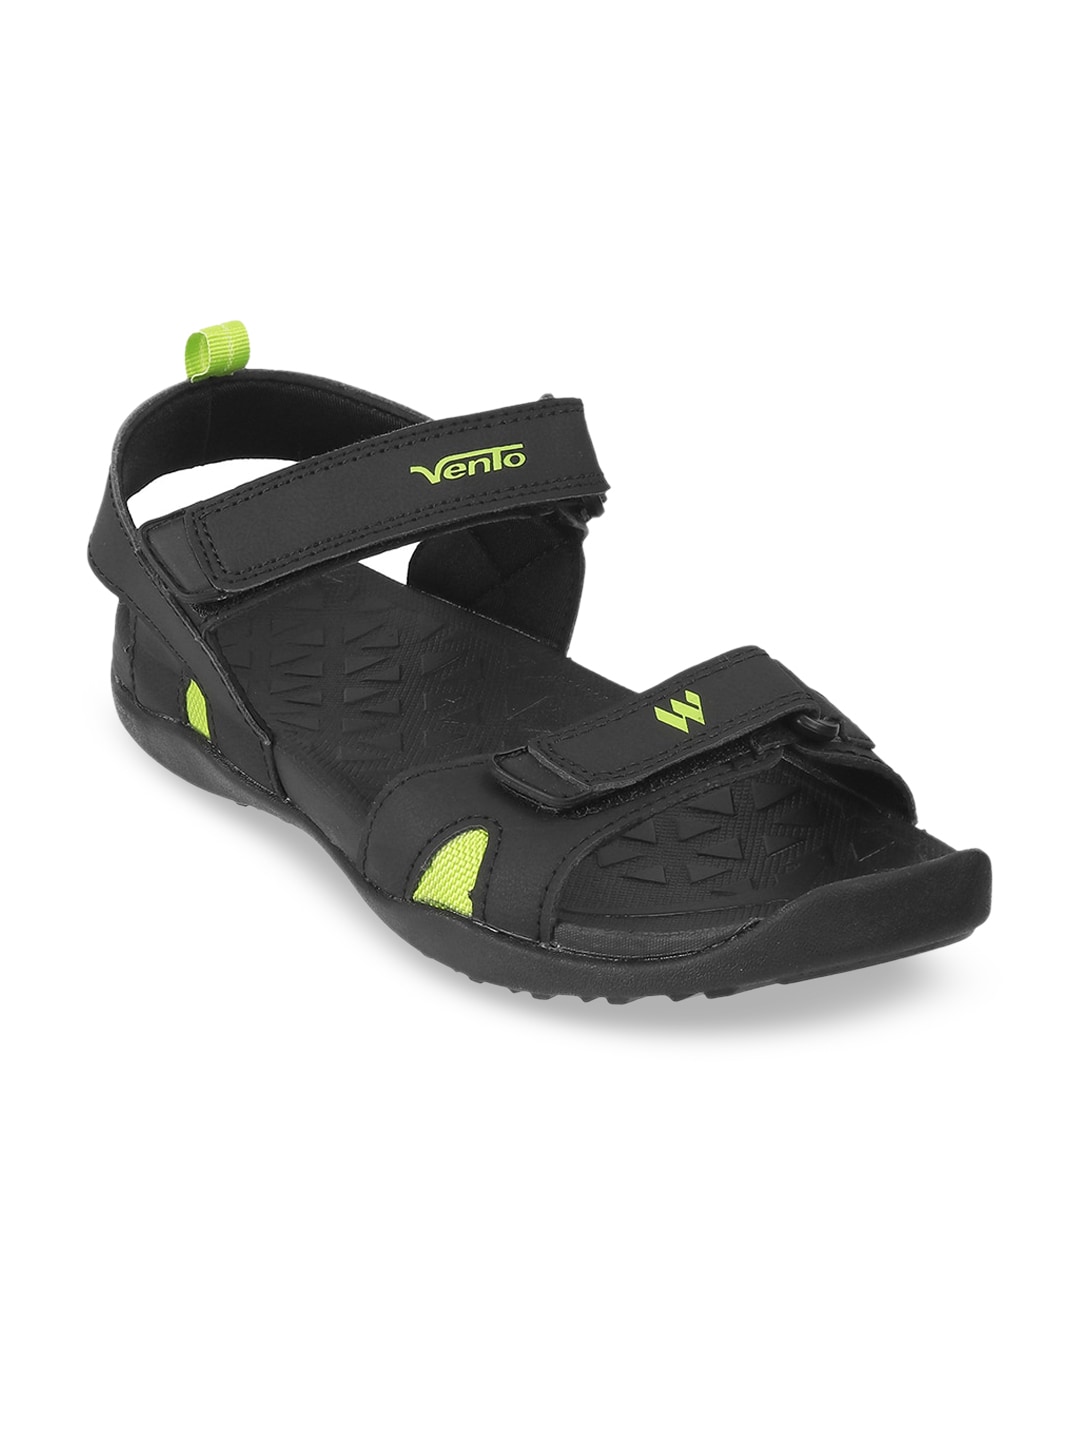 Vento Unisex Black & Green Solid Sports Sandals Price in India